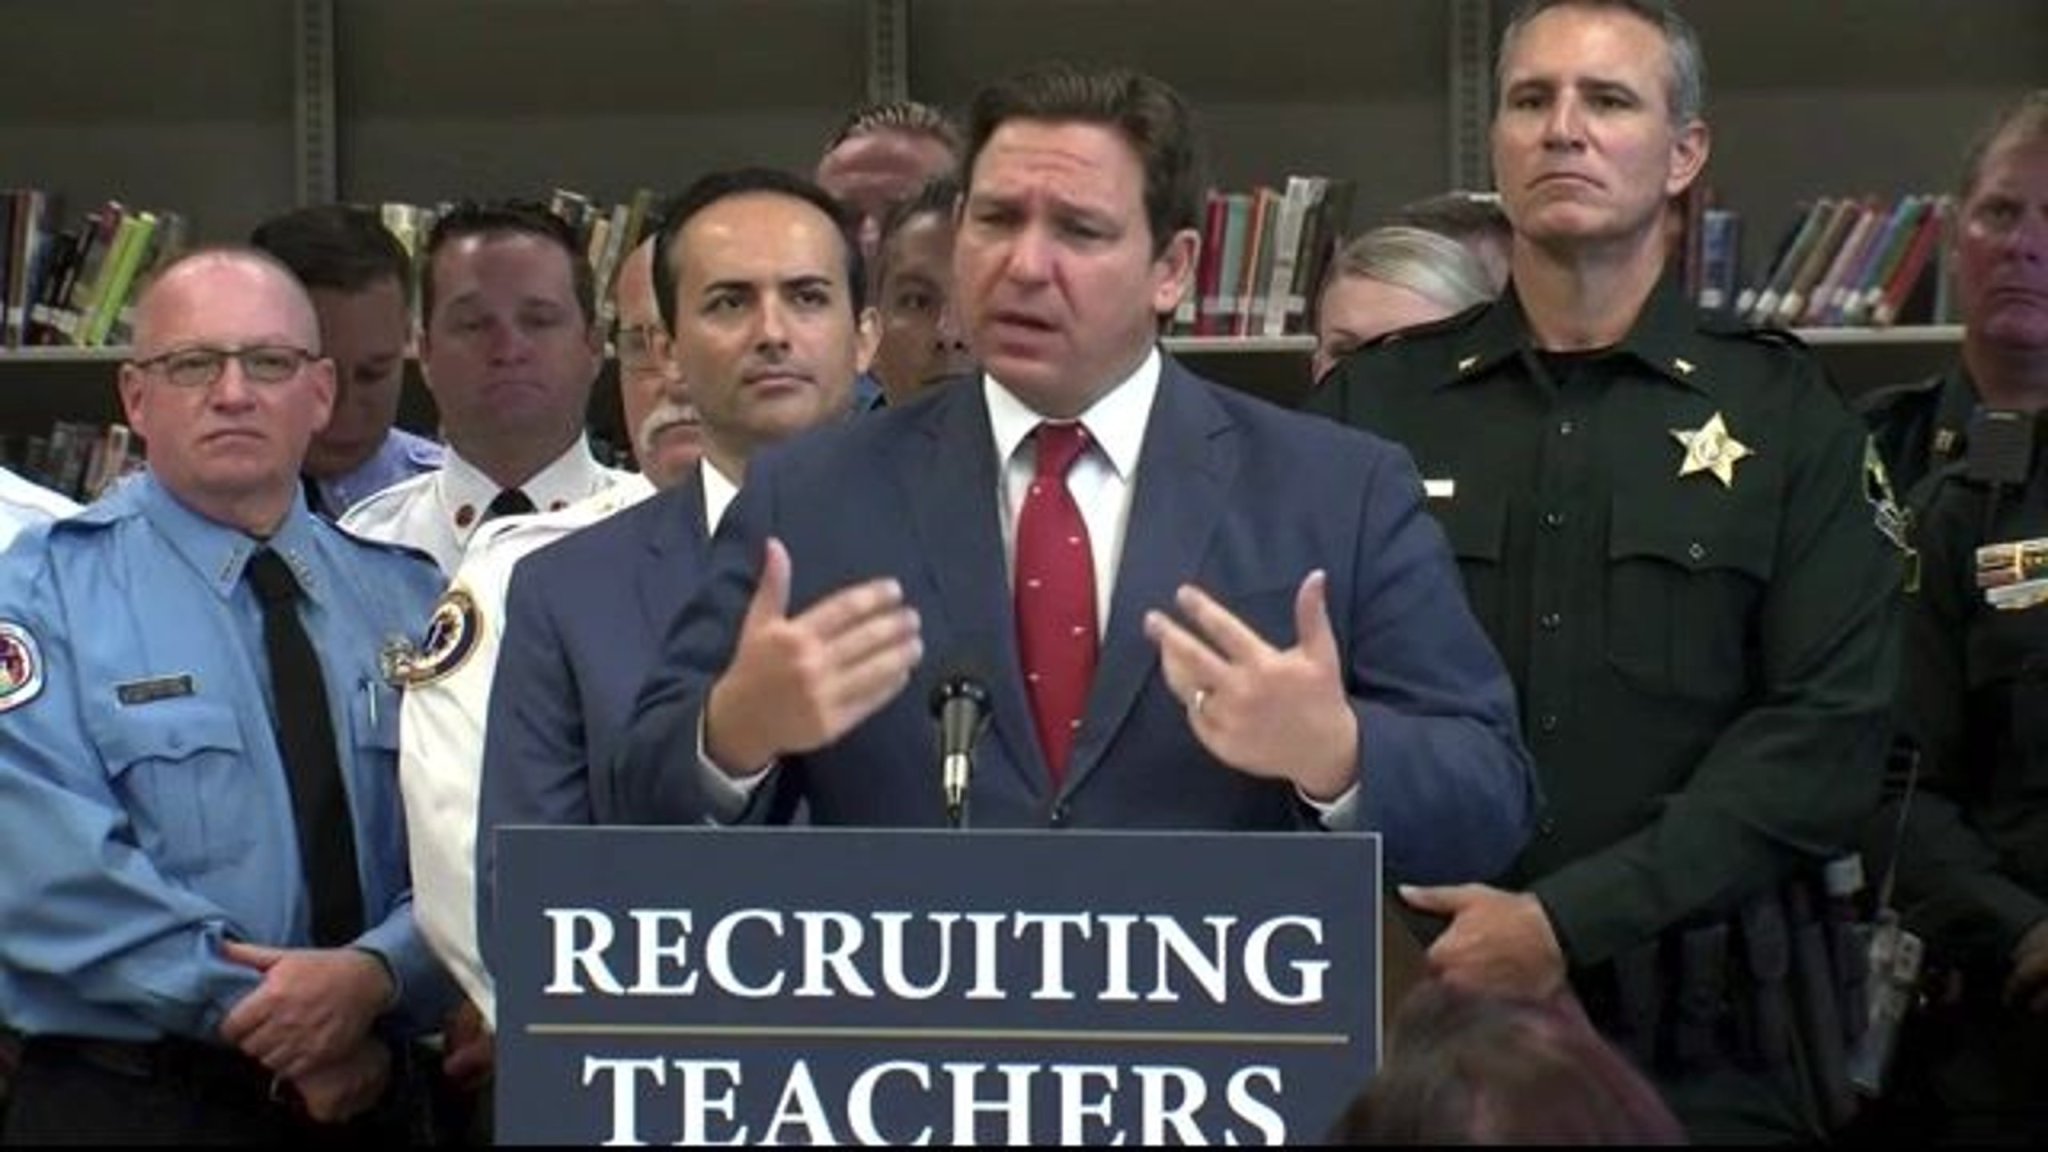 Gov. Ron DeSantis (R-FL) defends decision to allow veterans to teach in classrooms without traditional credentials.